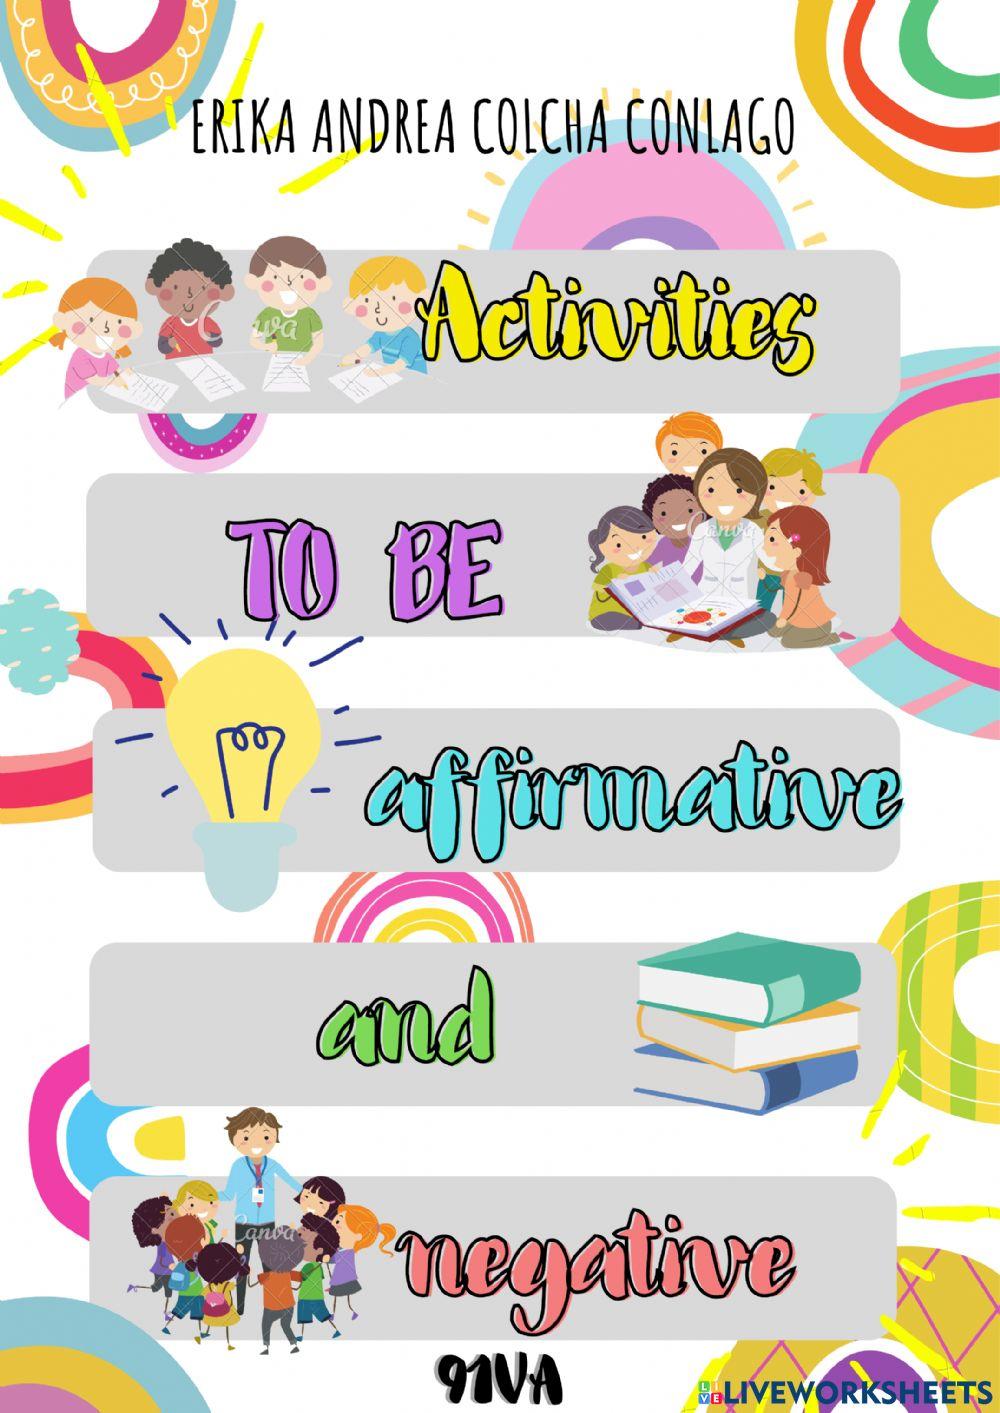 TO BE affirmative and negative